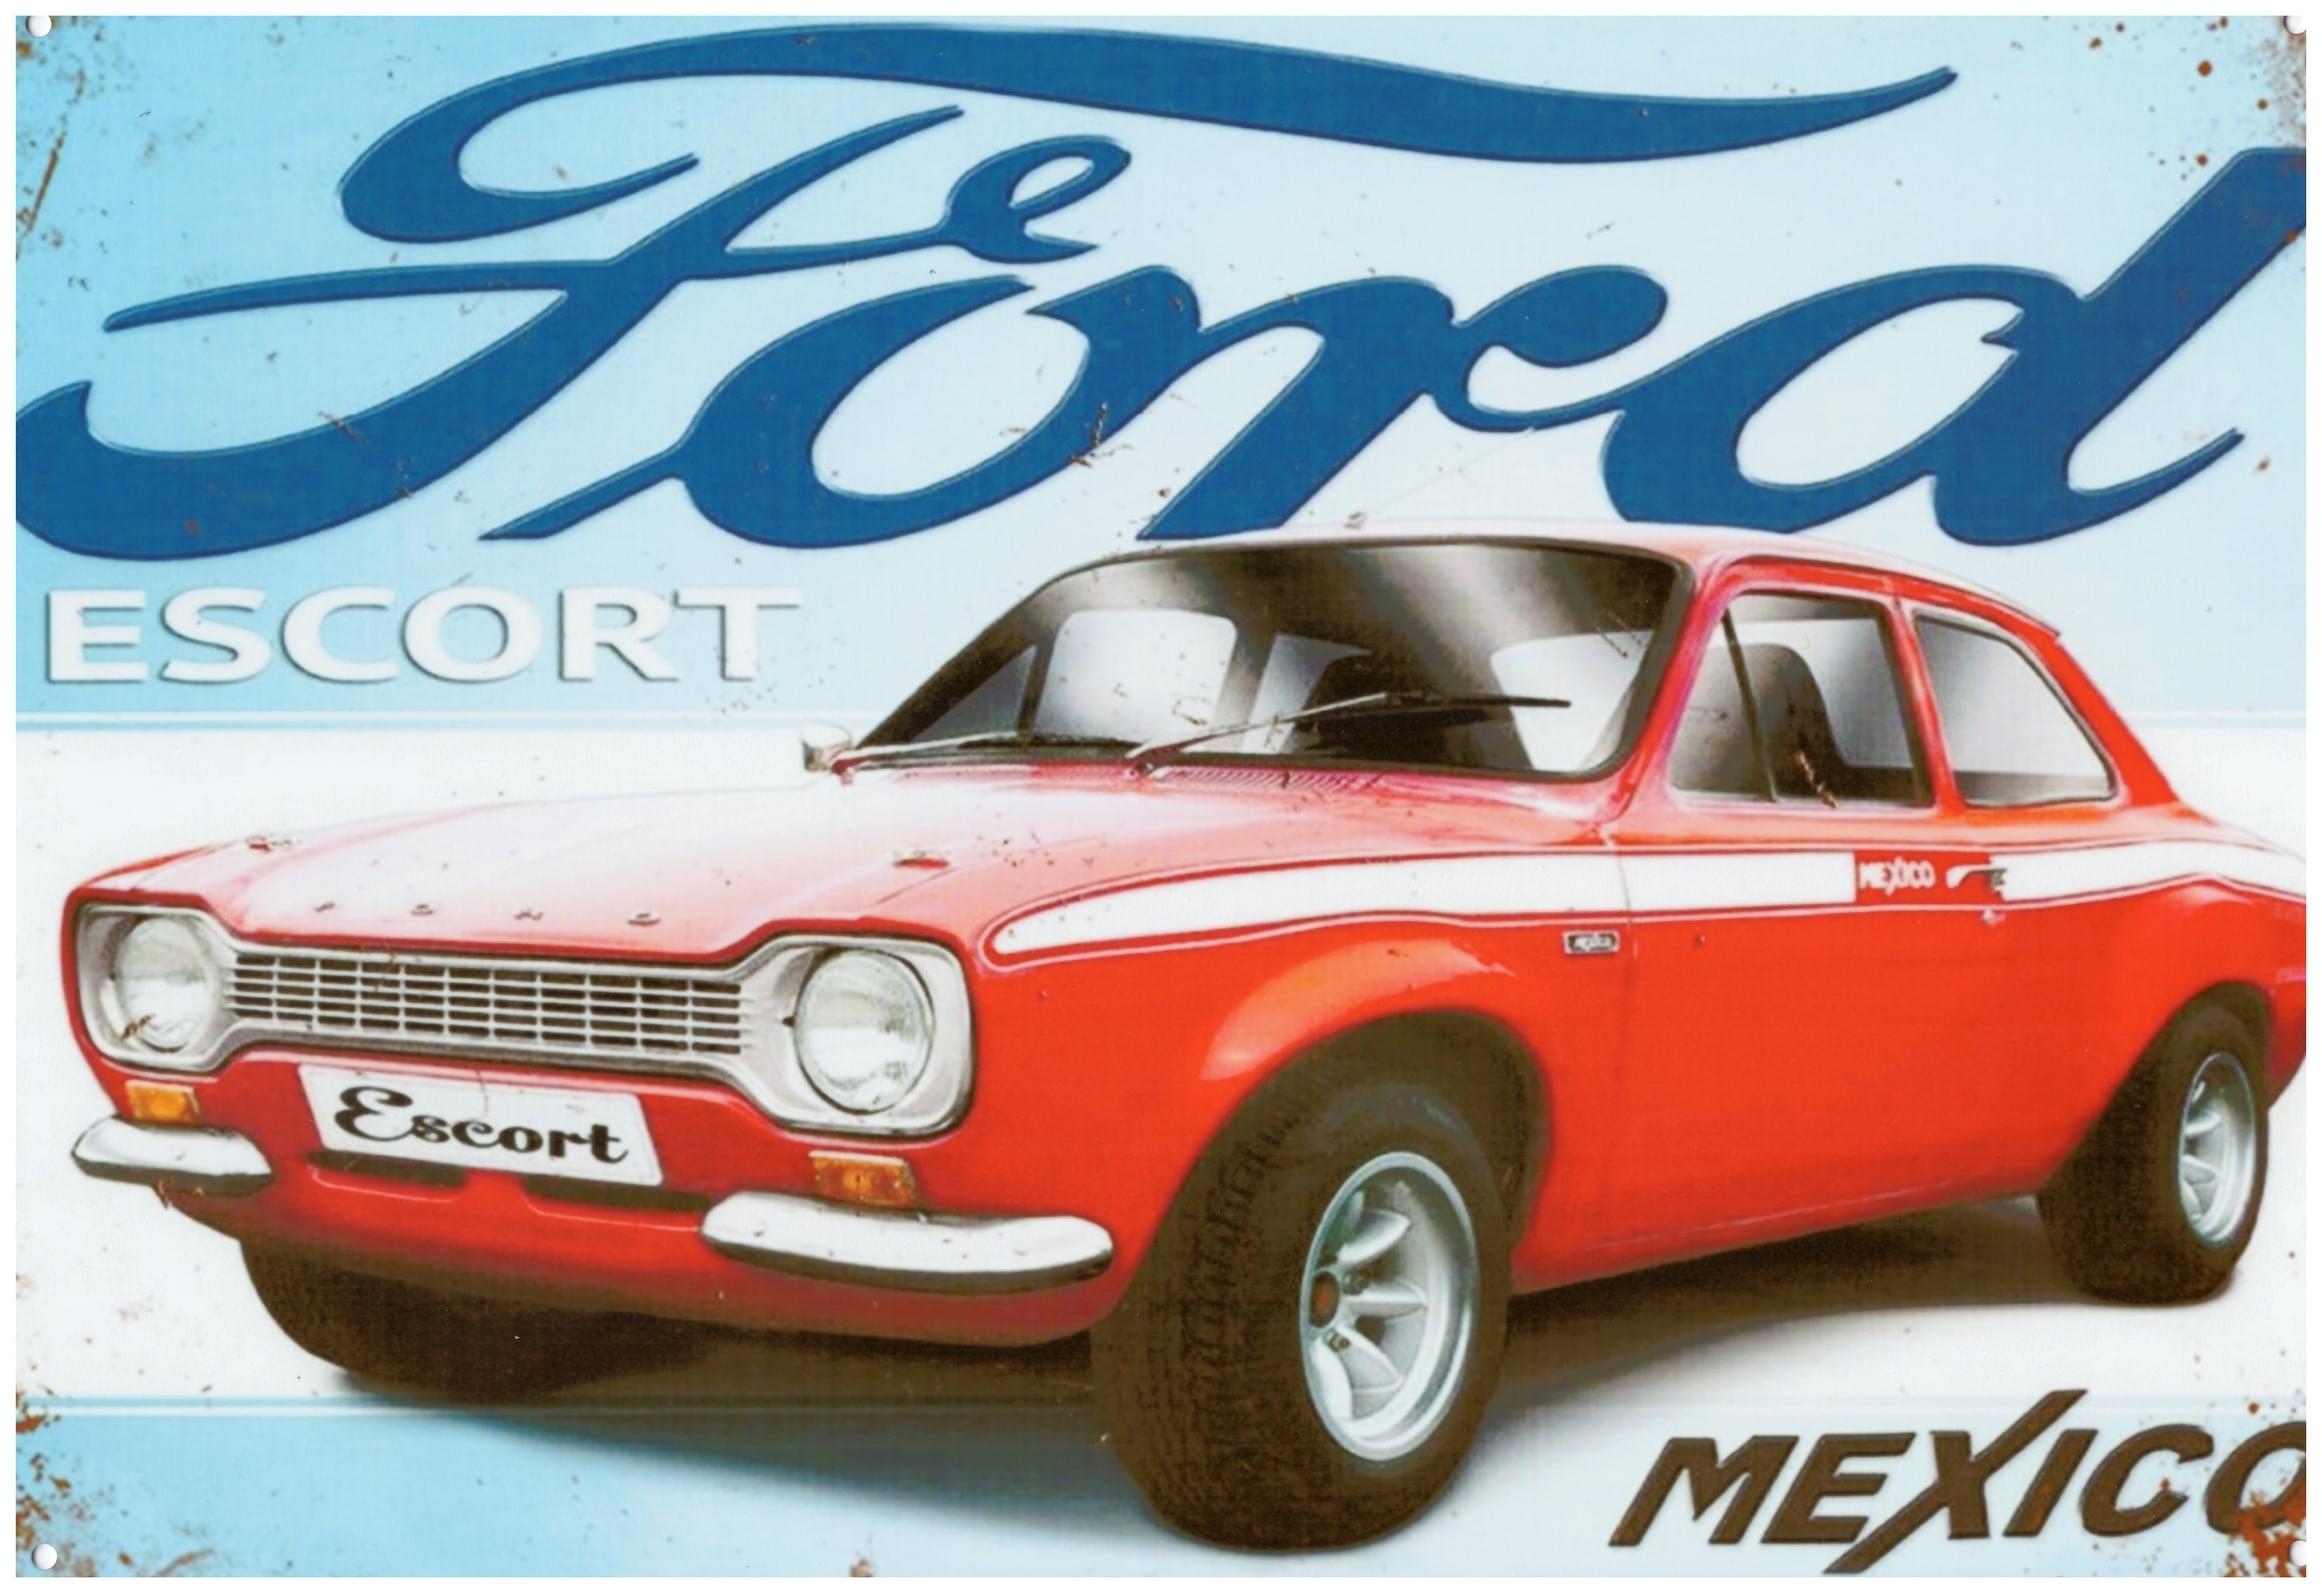 Ford Escort Mexico - Old-Signs.co.uk